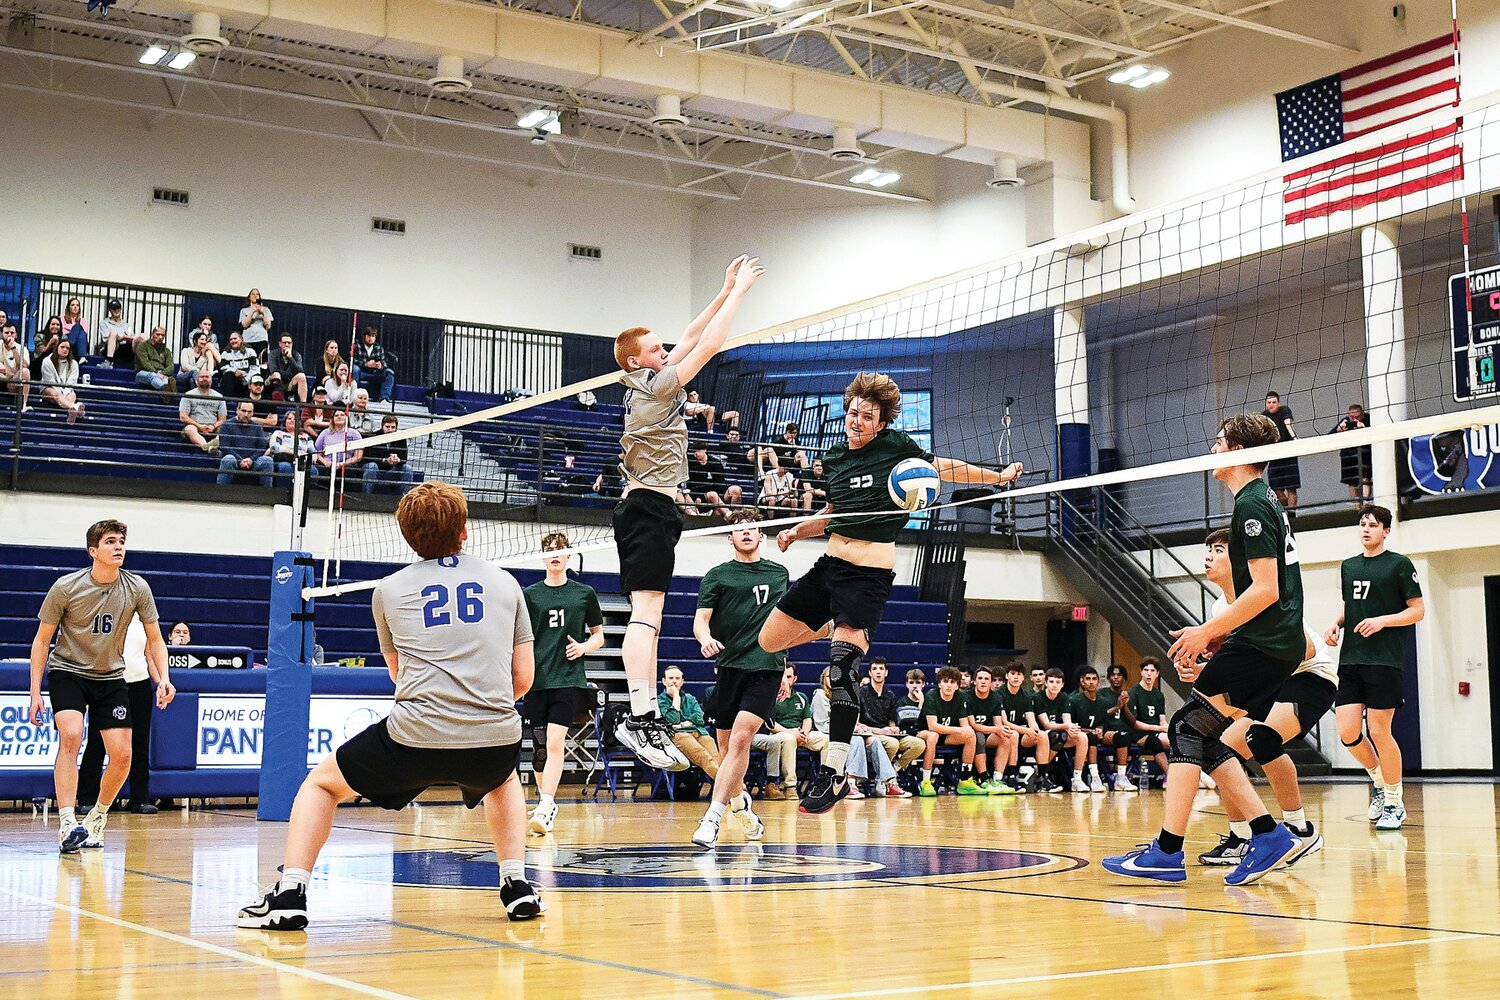 Pennridge’s Bryce Ammon slams the point in front of the block of Quakertown’s James Conner.